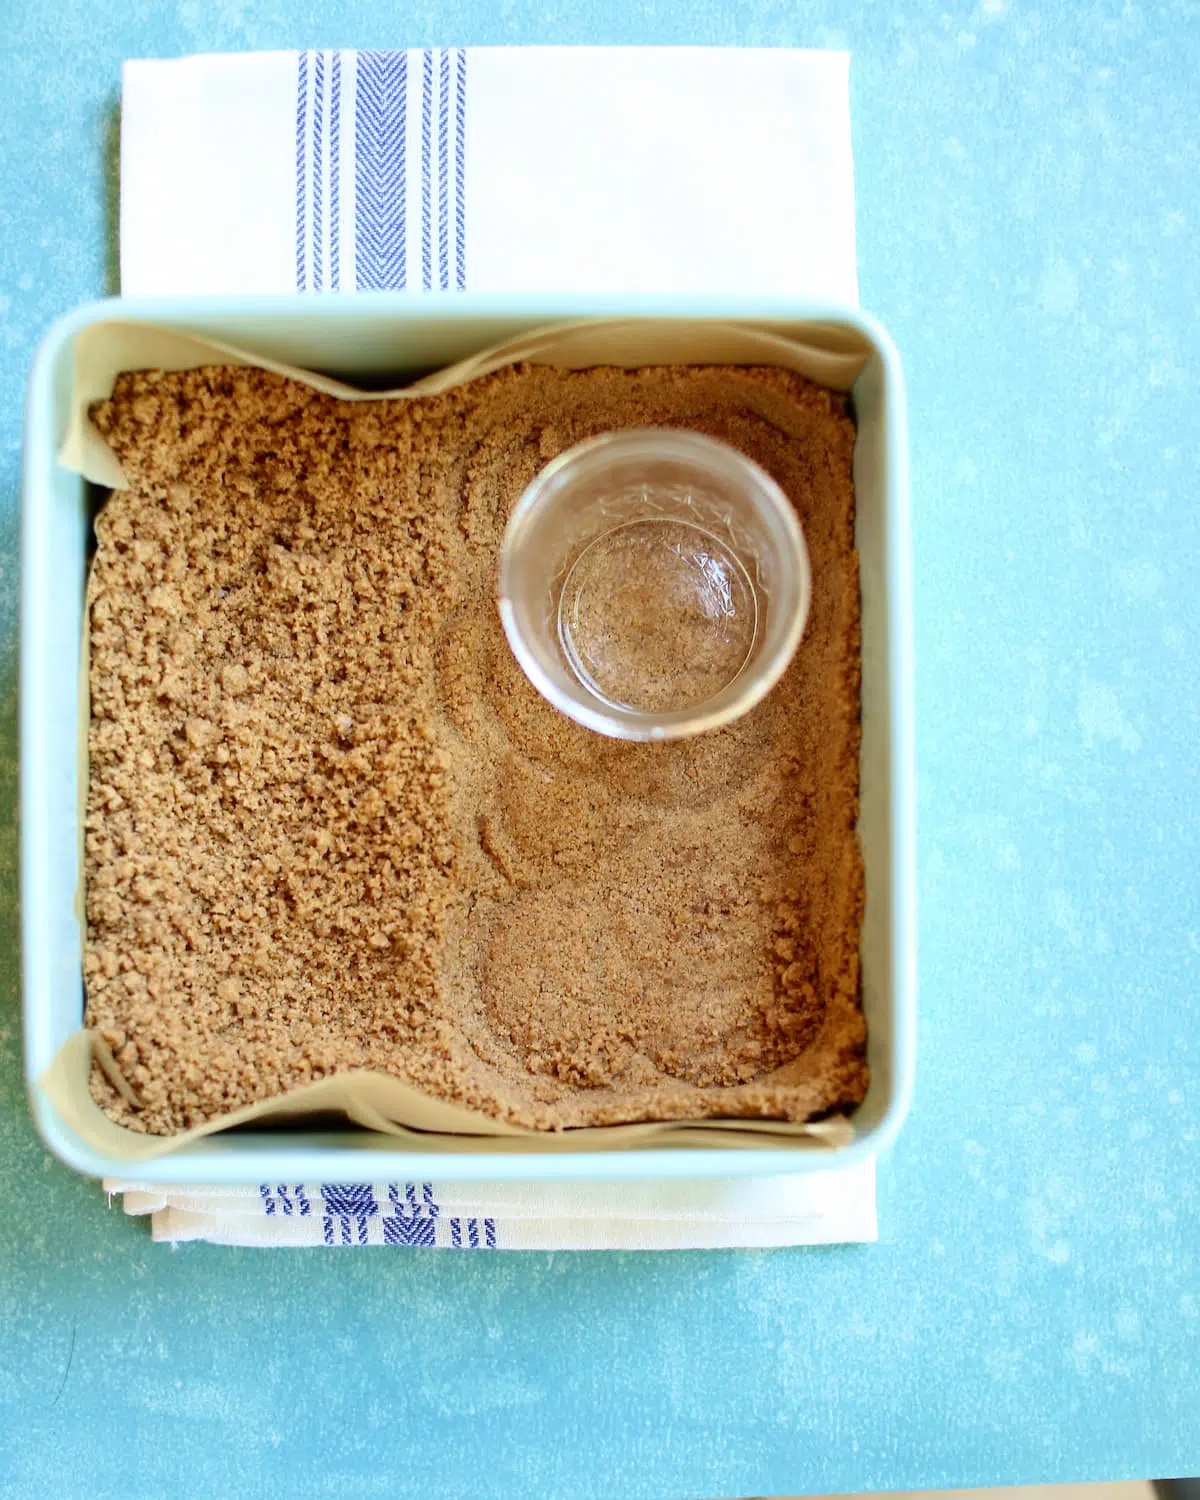 a square baking pan with graham cracker crumbs in it and a jar.